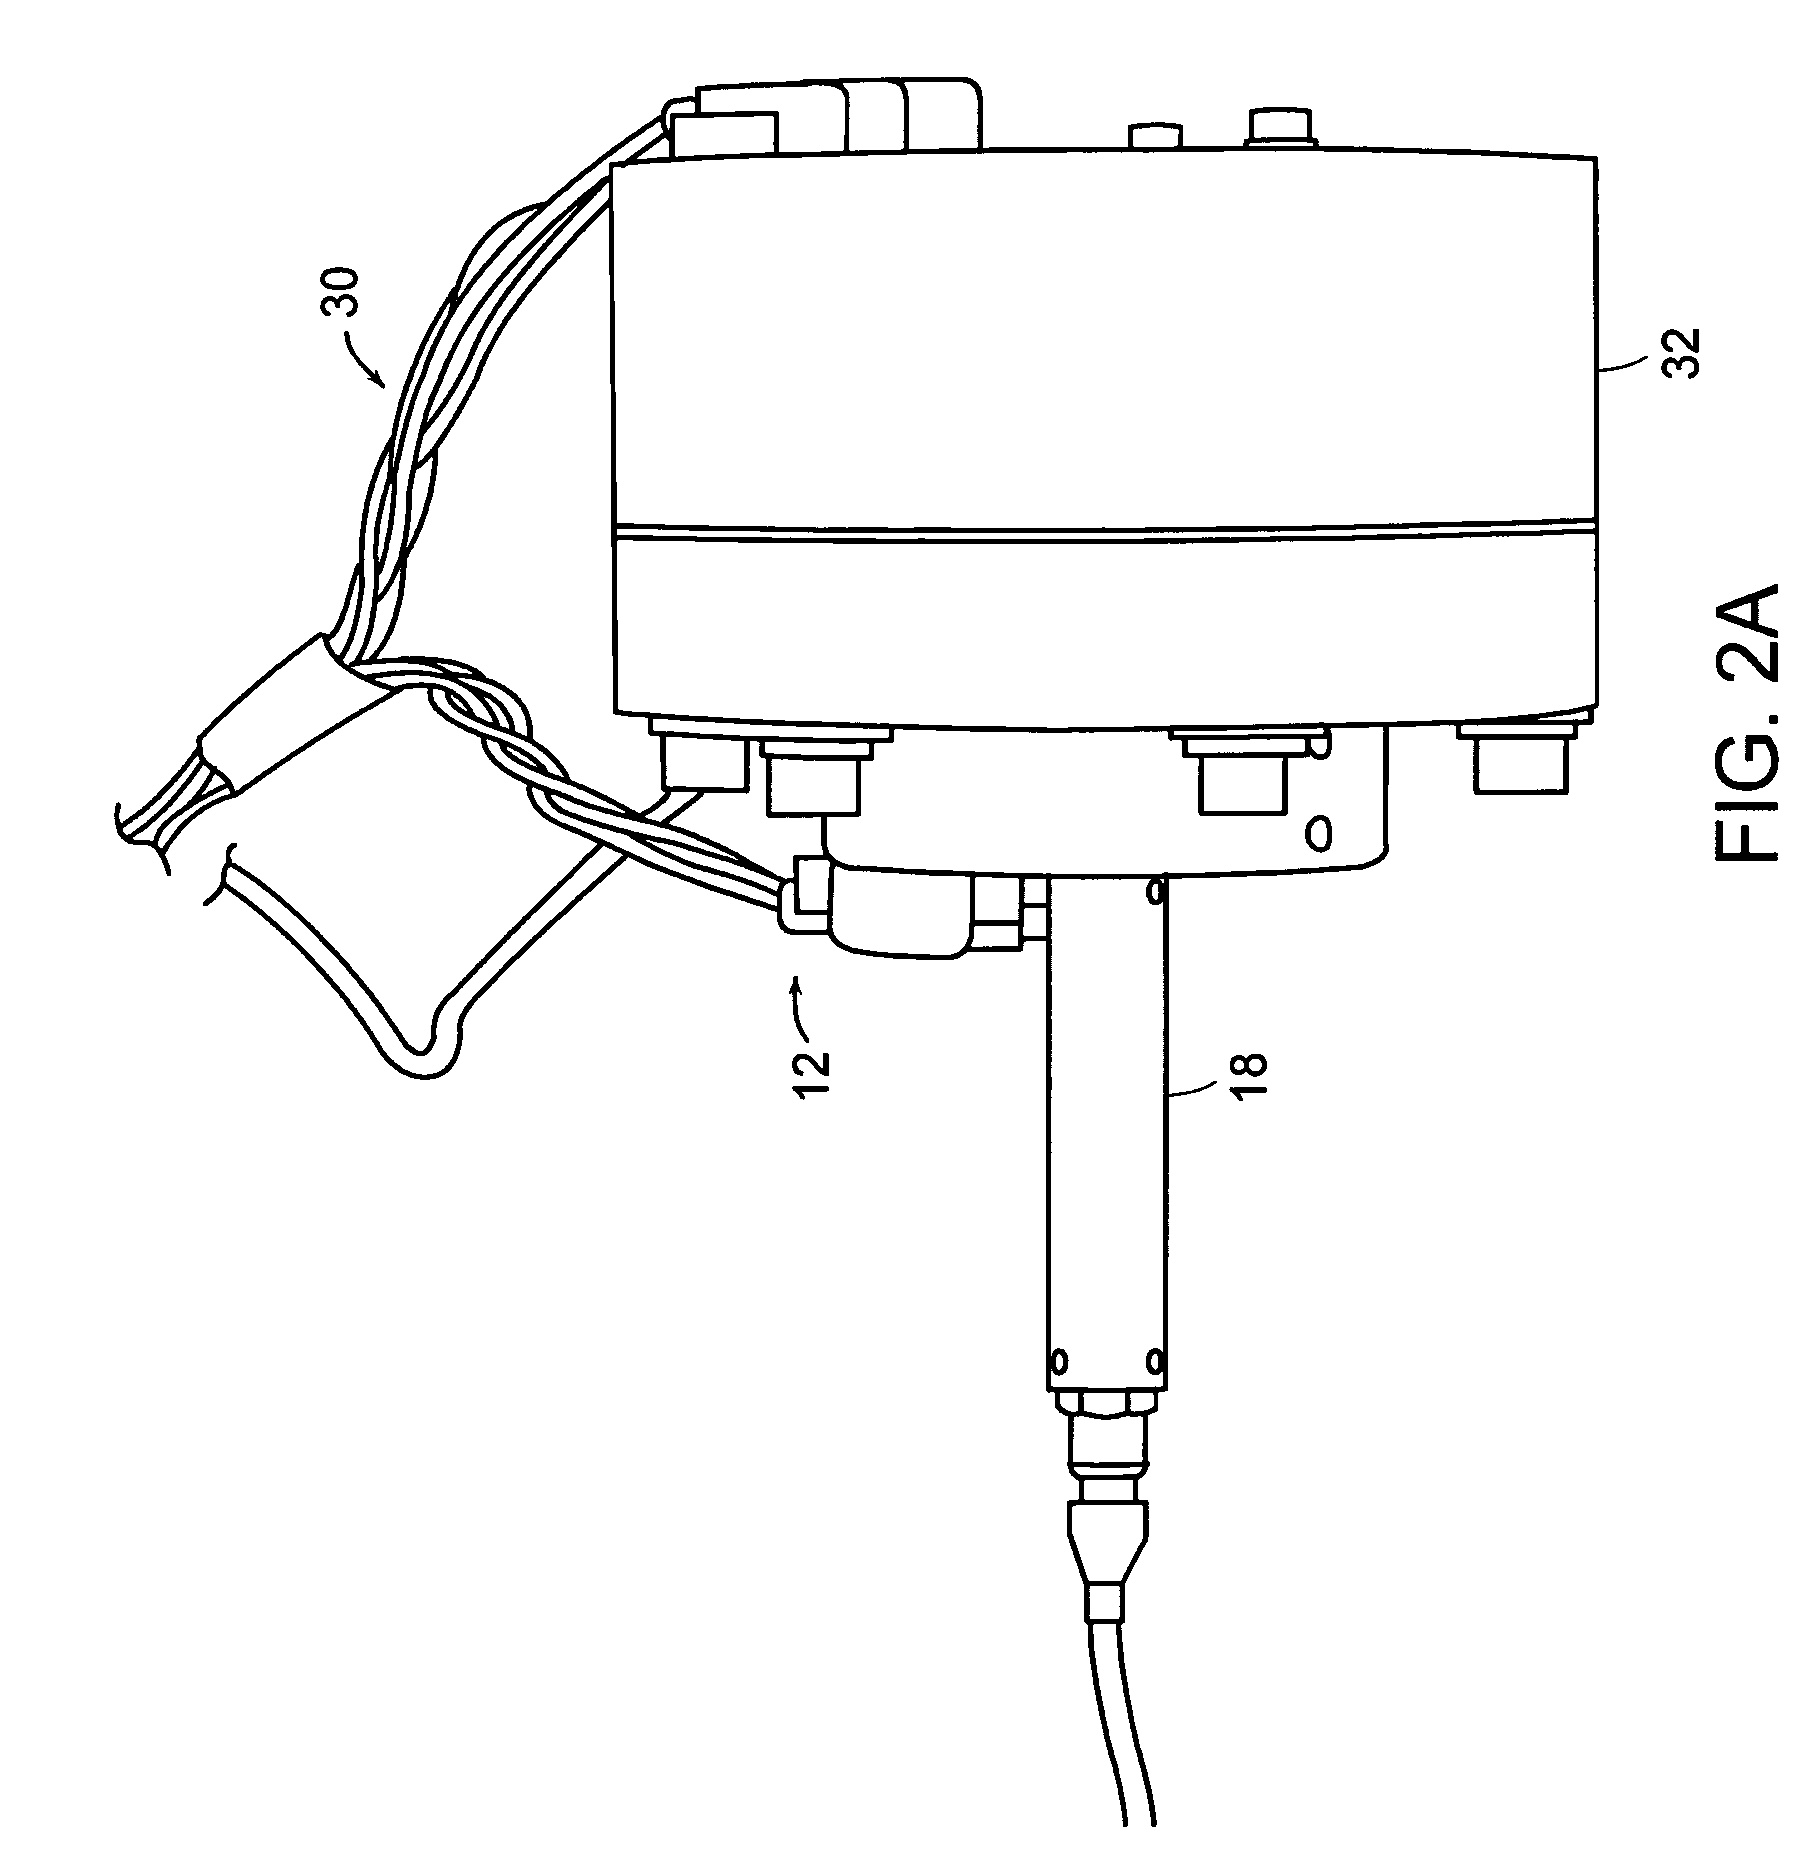 Variable reluctance fast positioning system and methods